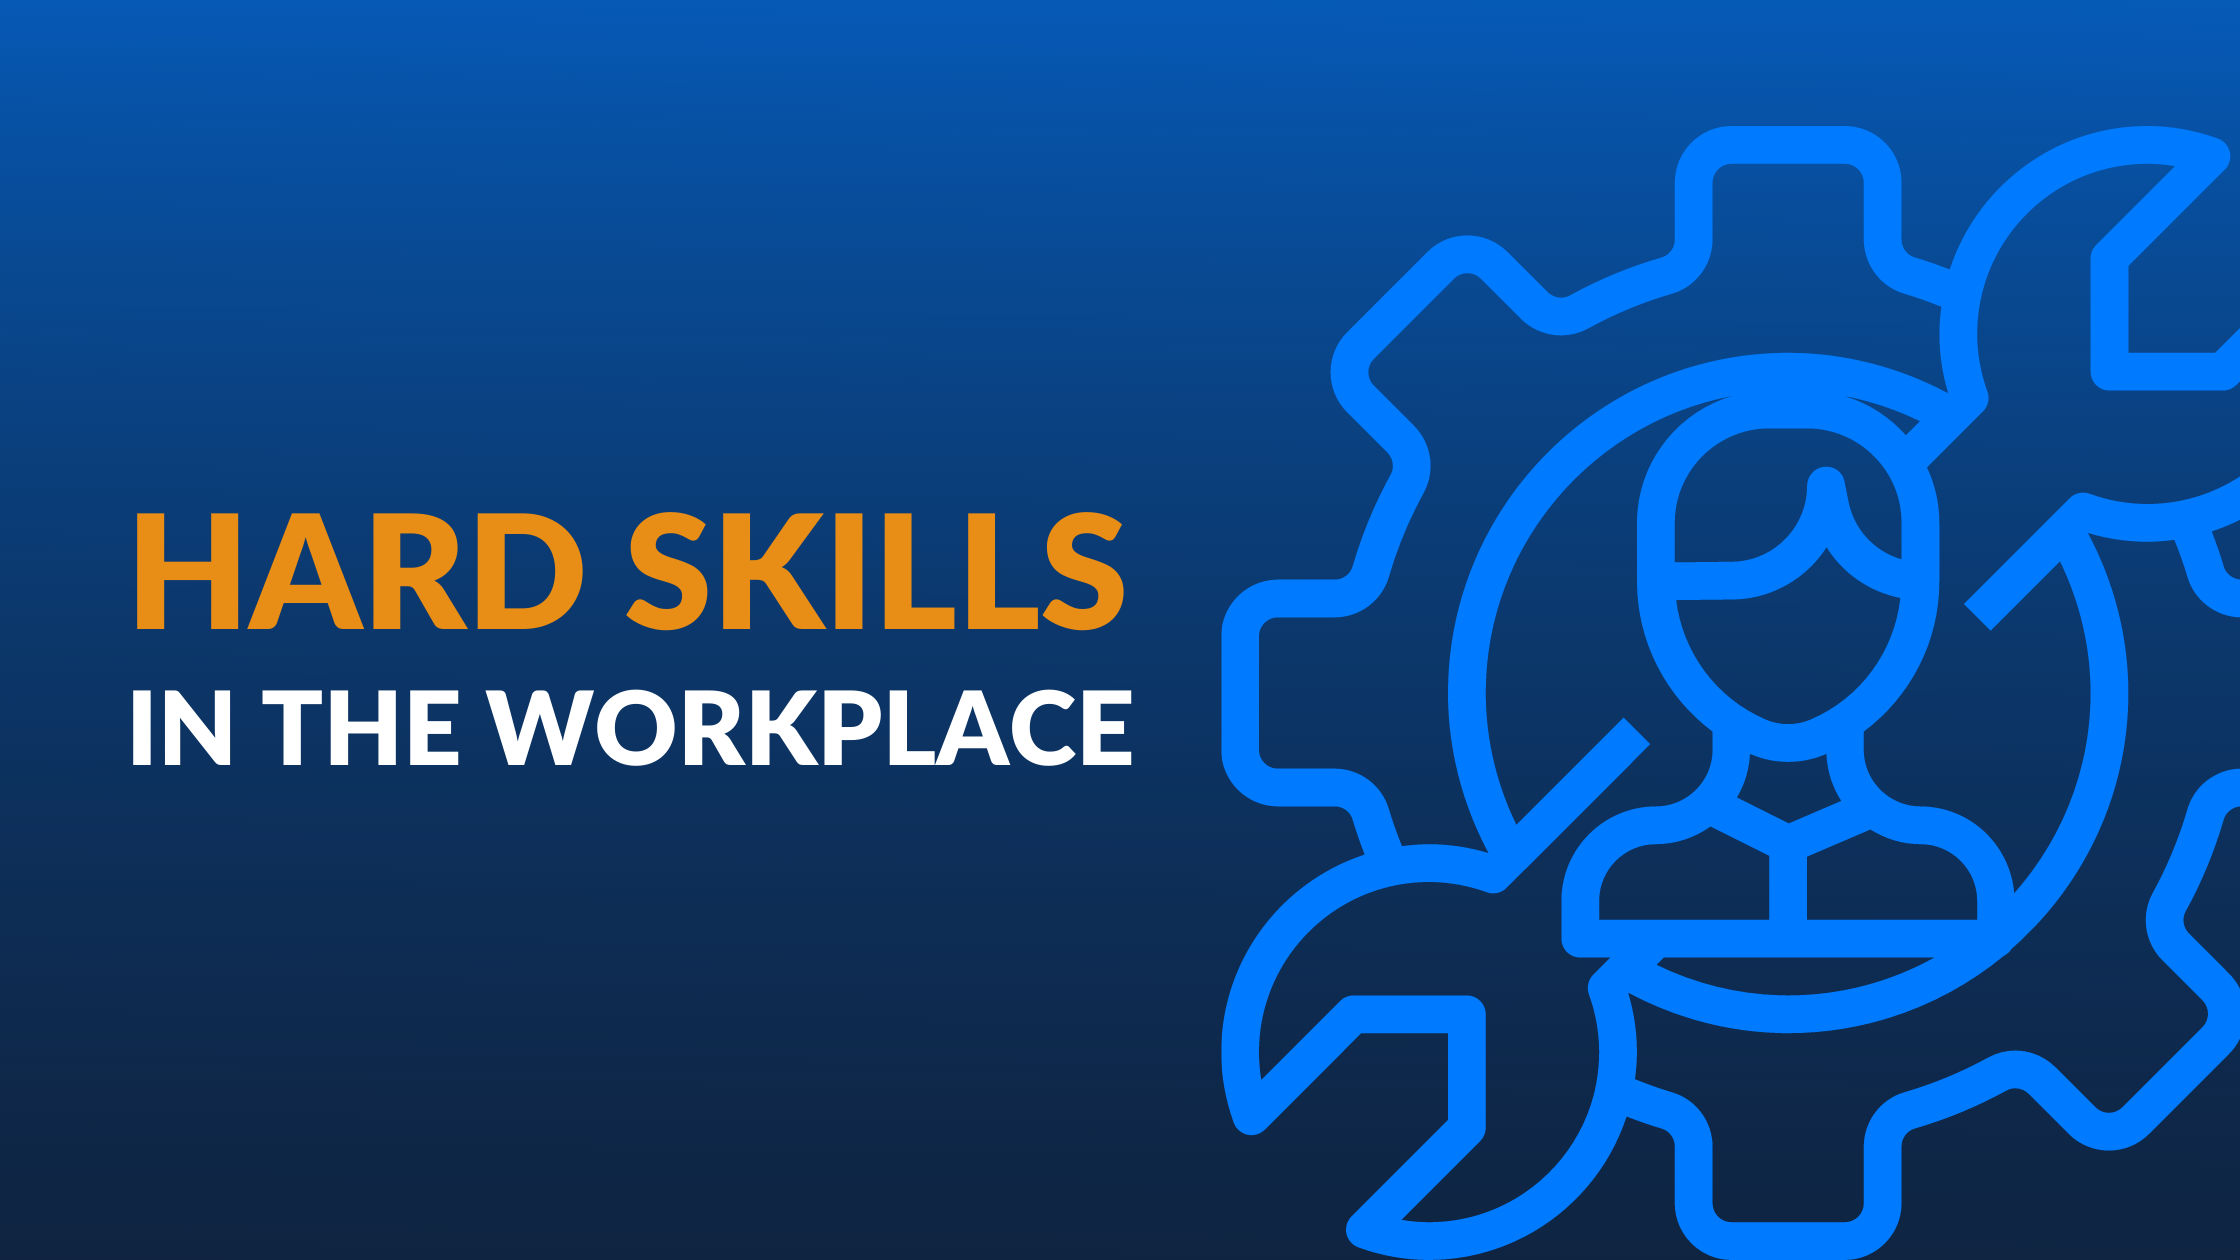 Why Hard Skills are Necessary in the Workplace